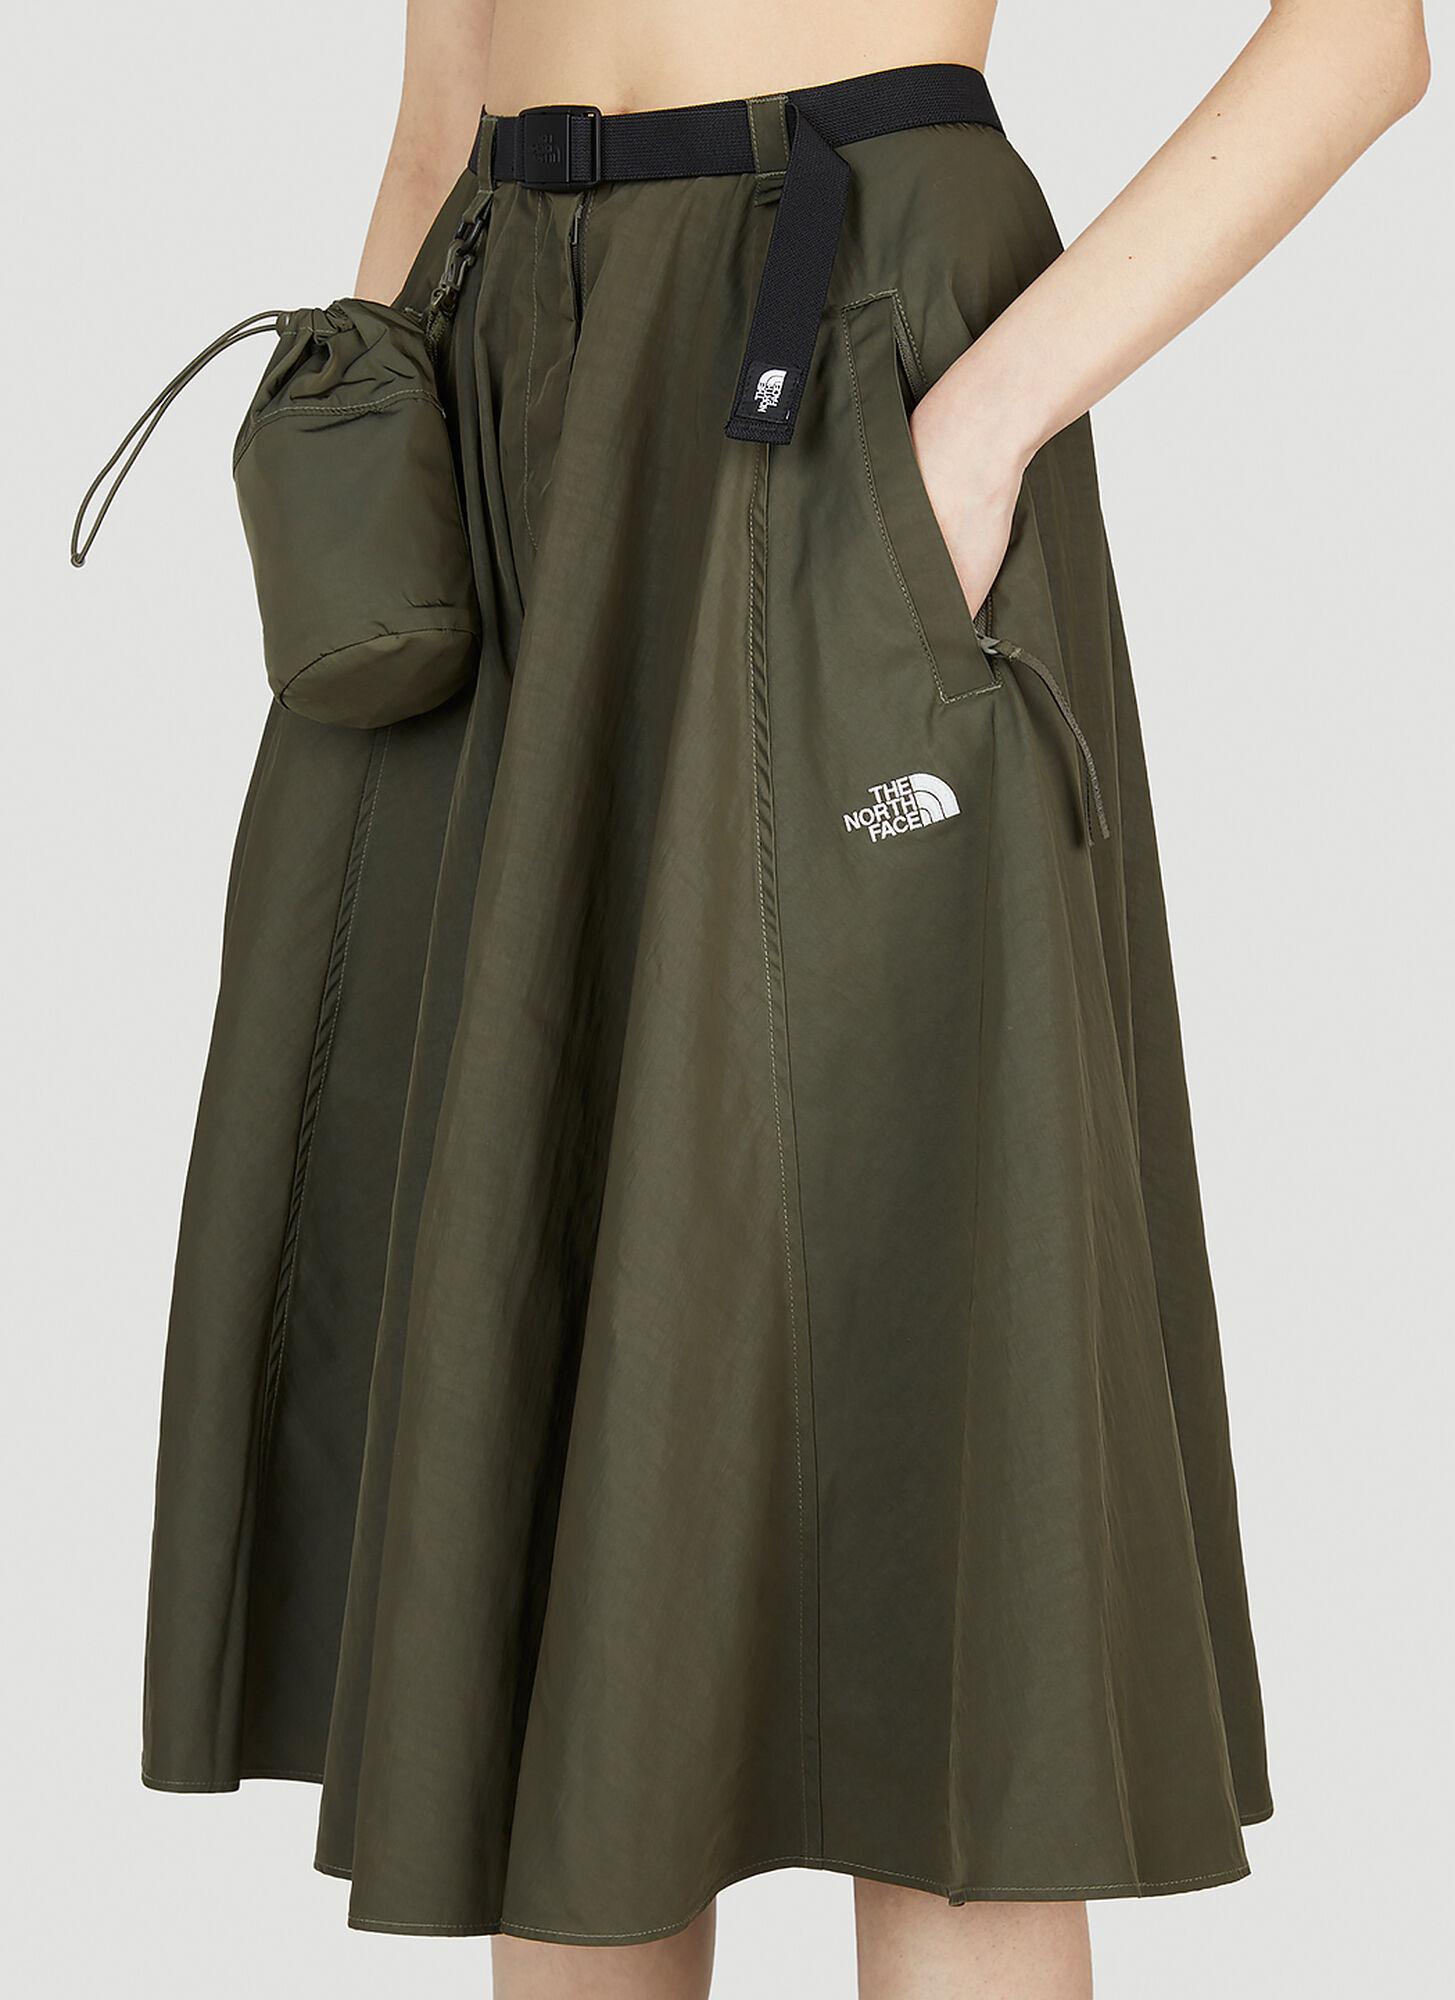 THE NORTH FACE BLACK SERIES Circle Skirt in Green | Lyst